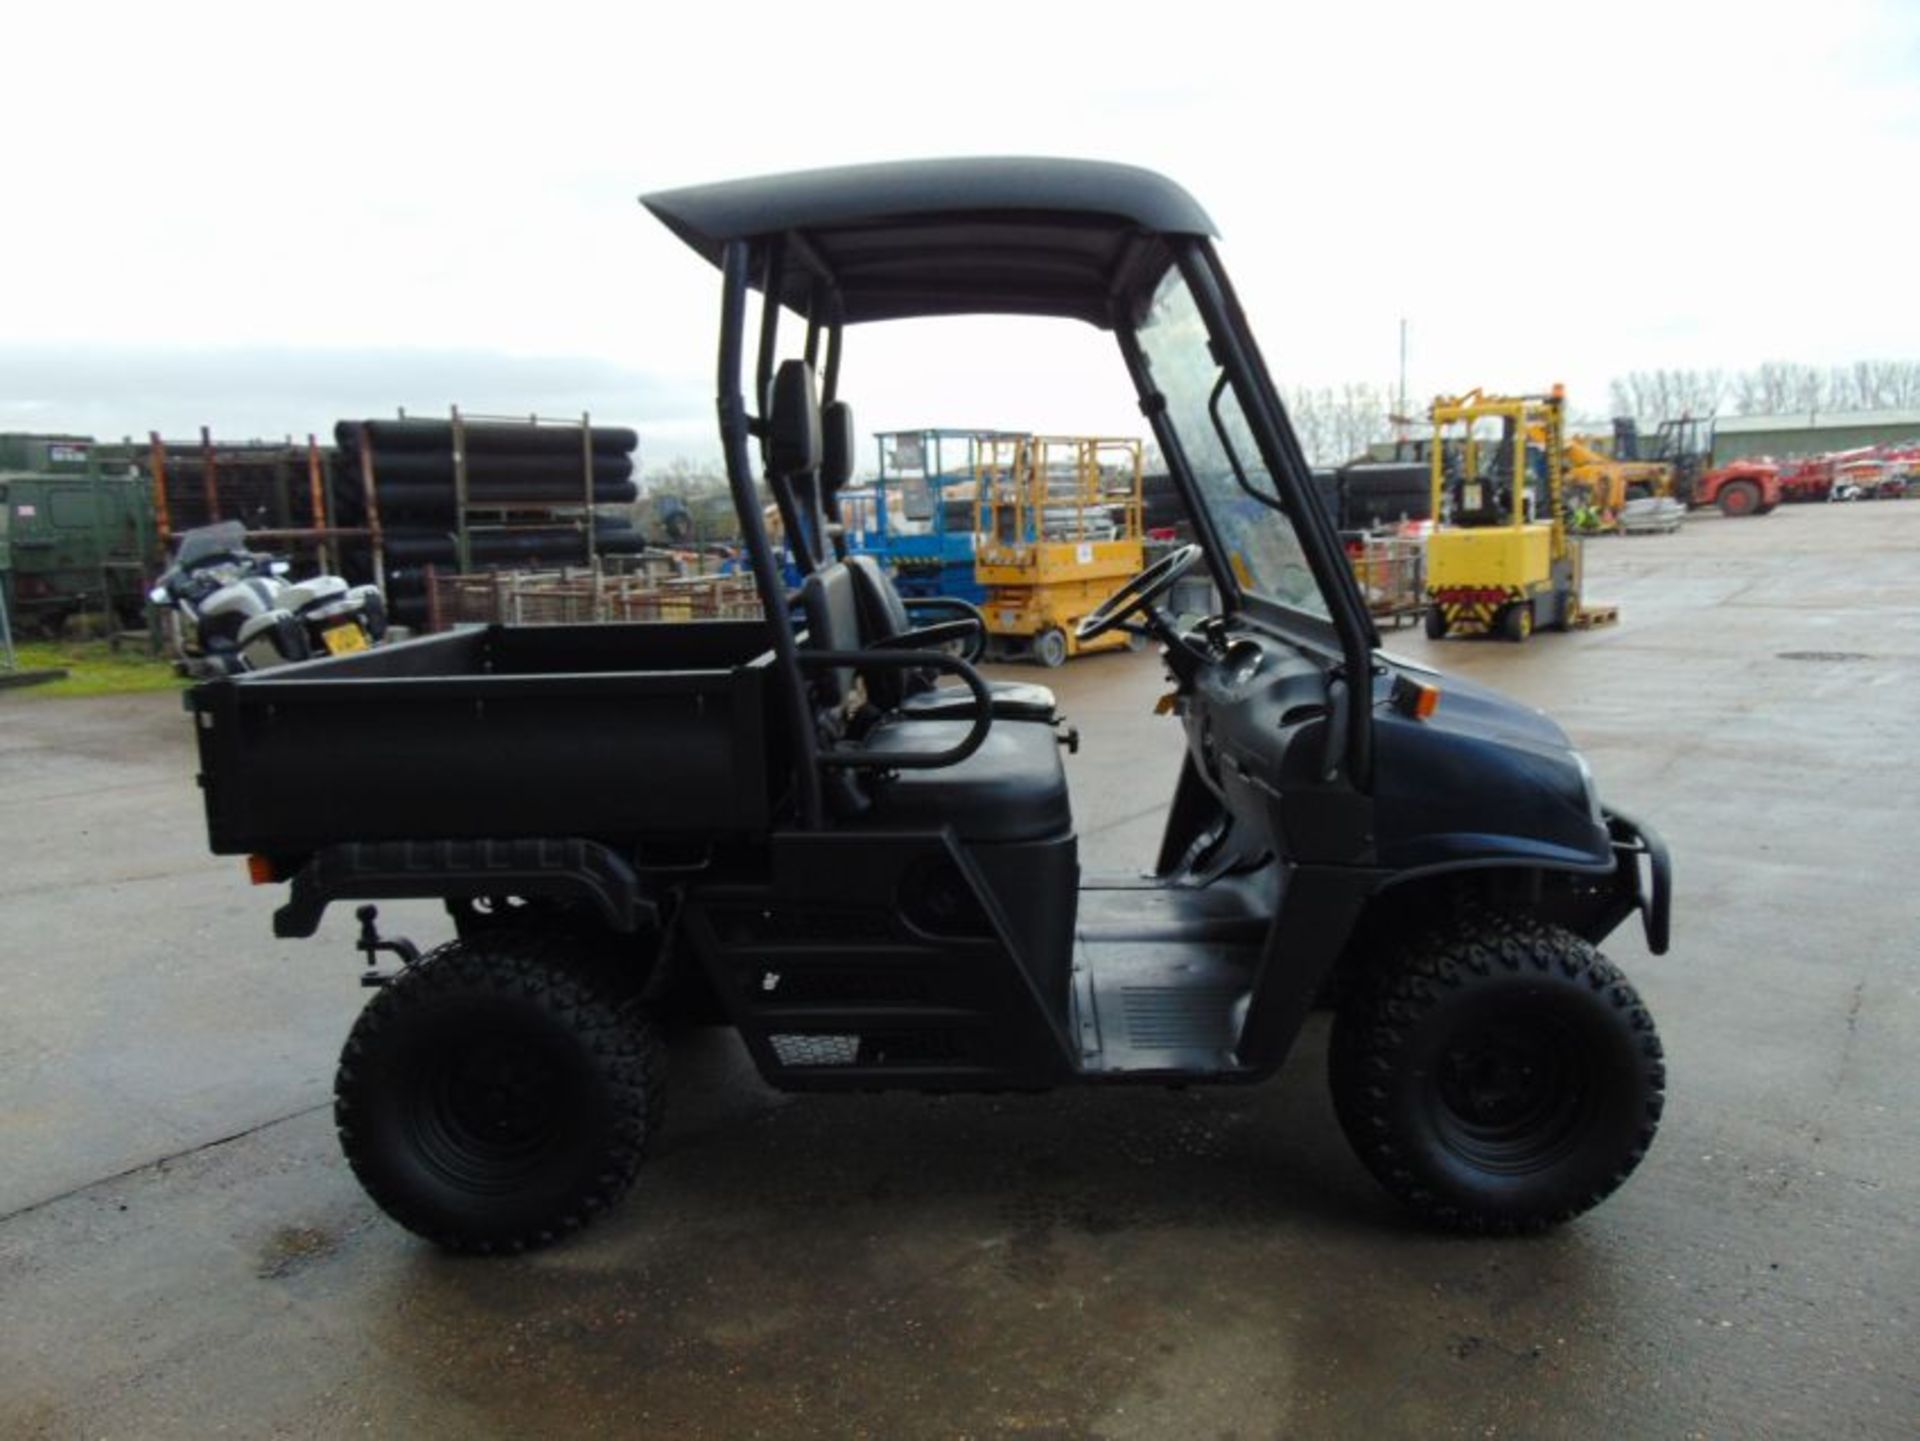 2014 Cushman XD1600 4x4 Diesel Utility Vehicle Showing 1104 hrs - Image 5 of 25